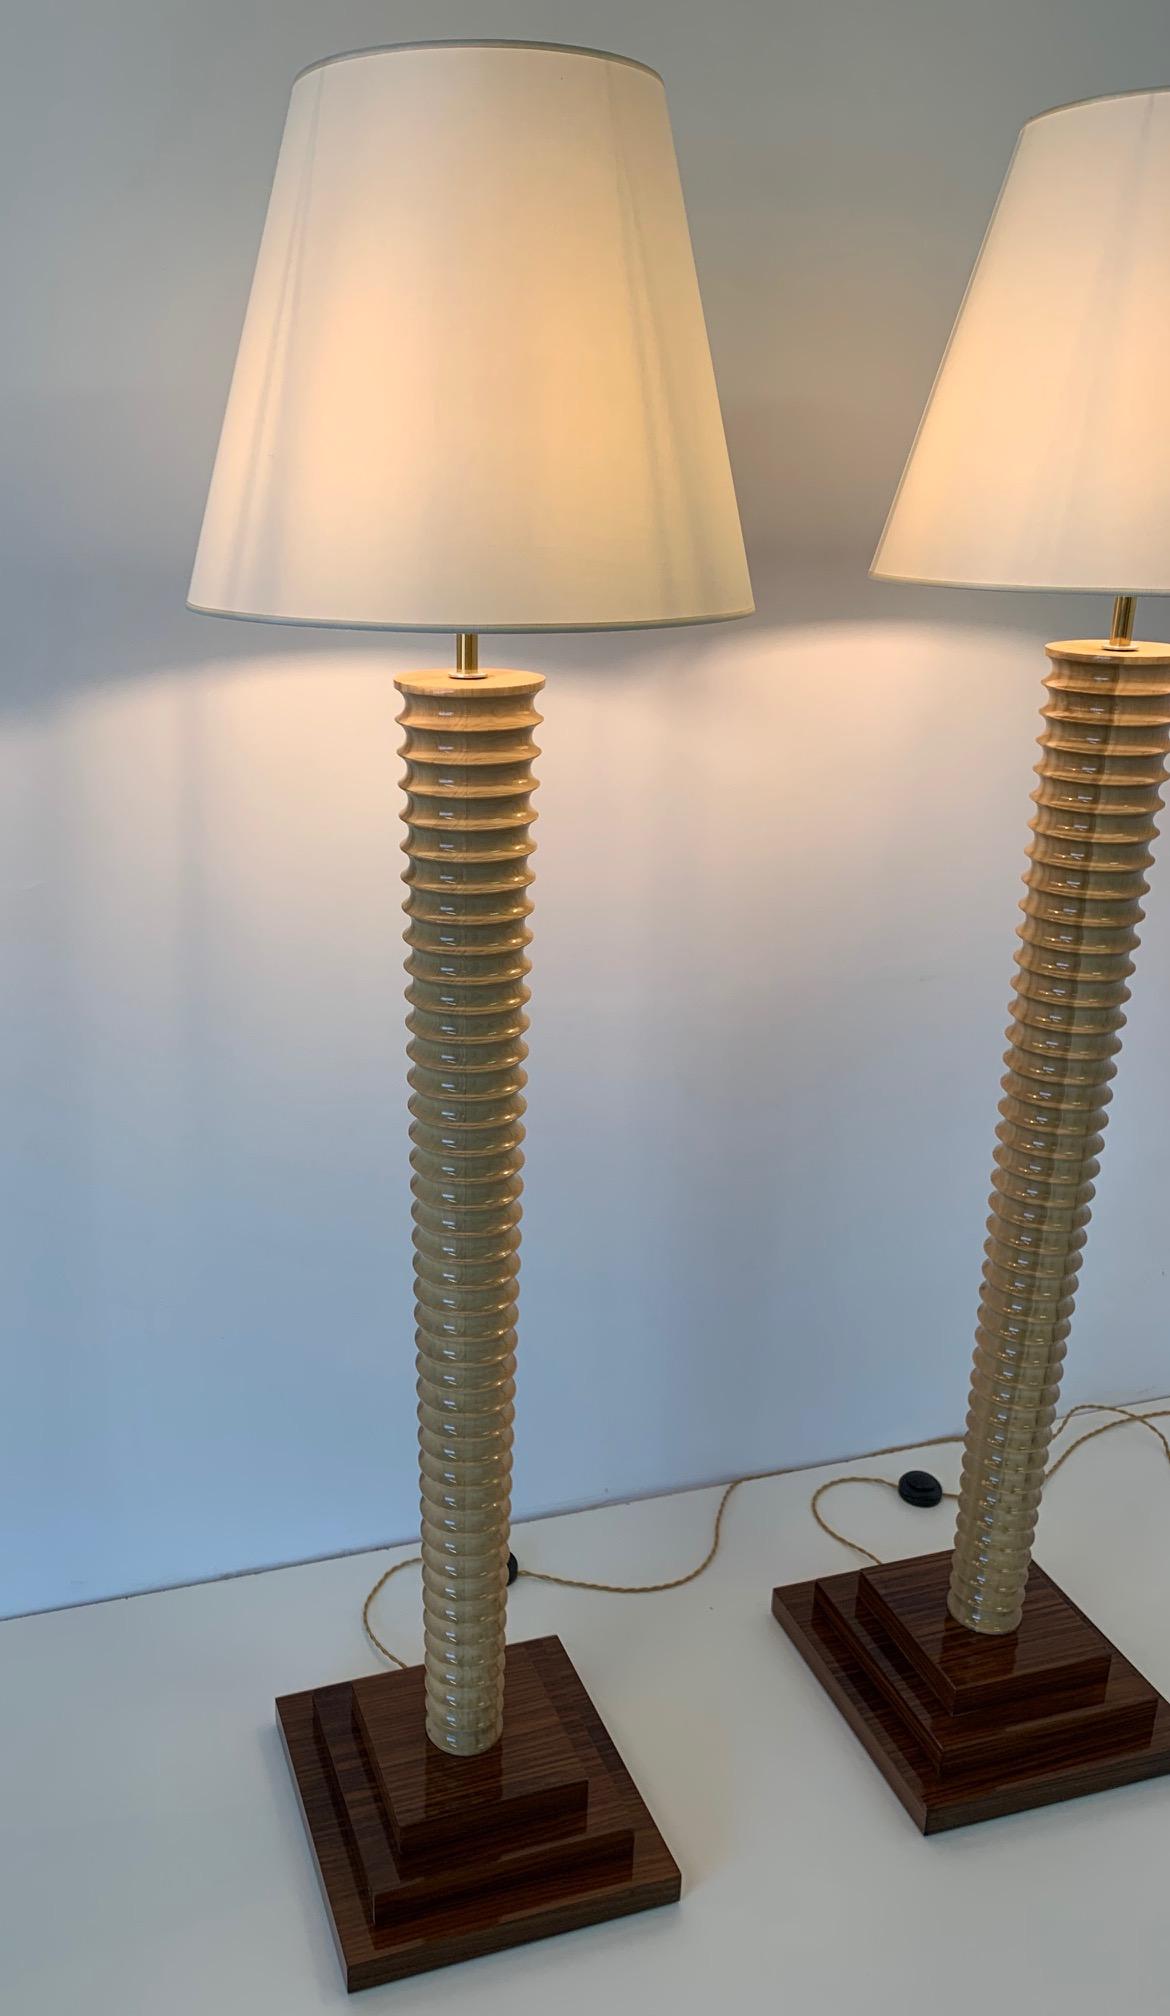 Pair of Art Deco style floor lamp made in Italy, in turned wood and precious ivory-colored lampshade.
Completely restored.